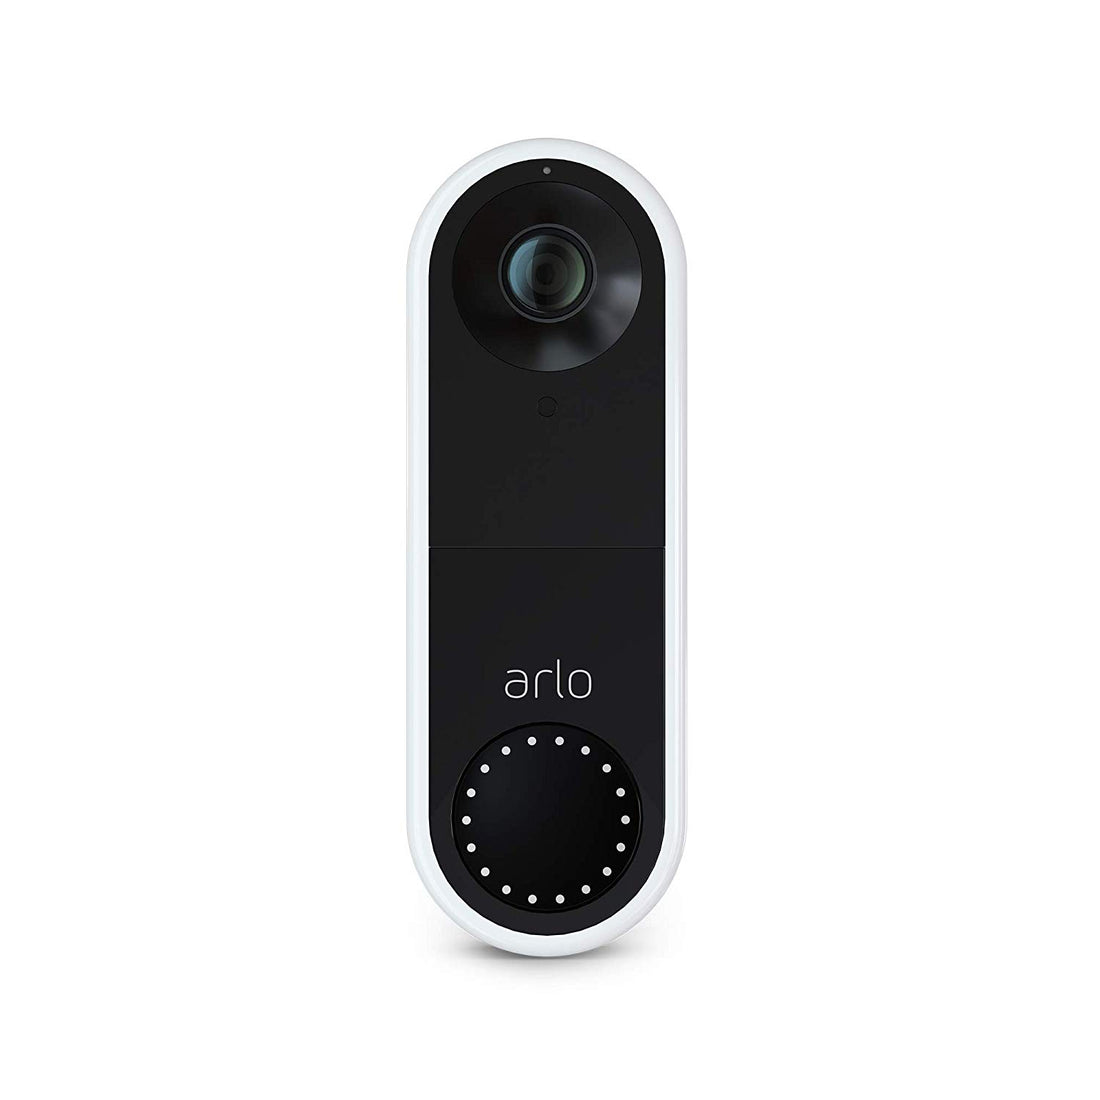 Arlo Wired Video Doorbell, HD Video Quality, 2-Way Audio - White/Black (New)